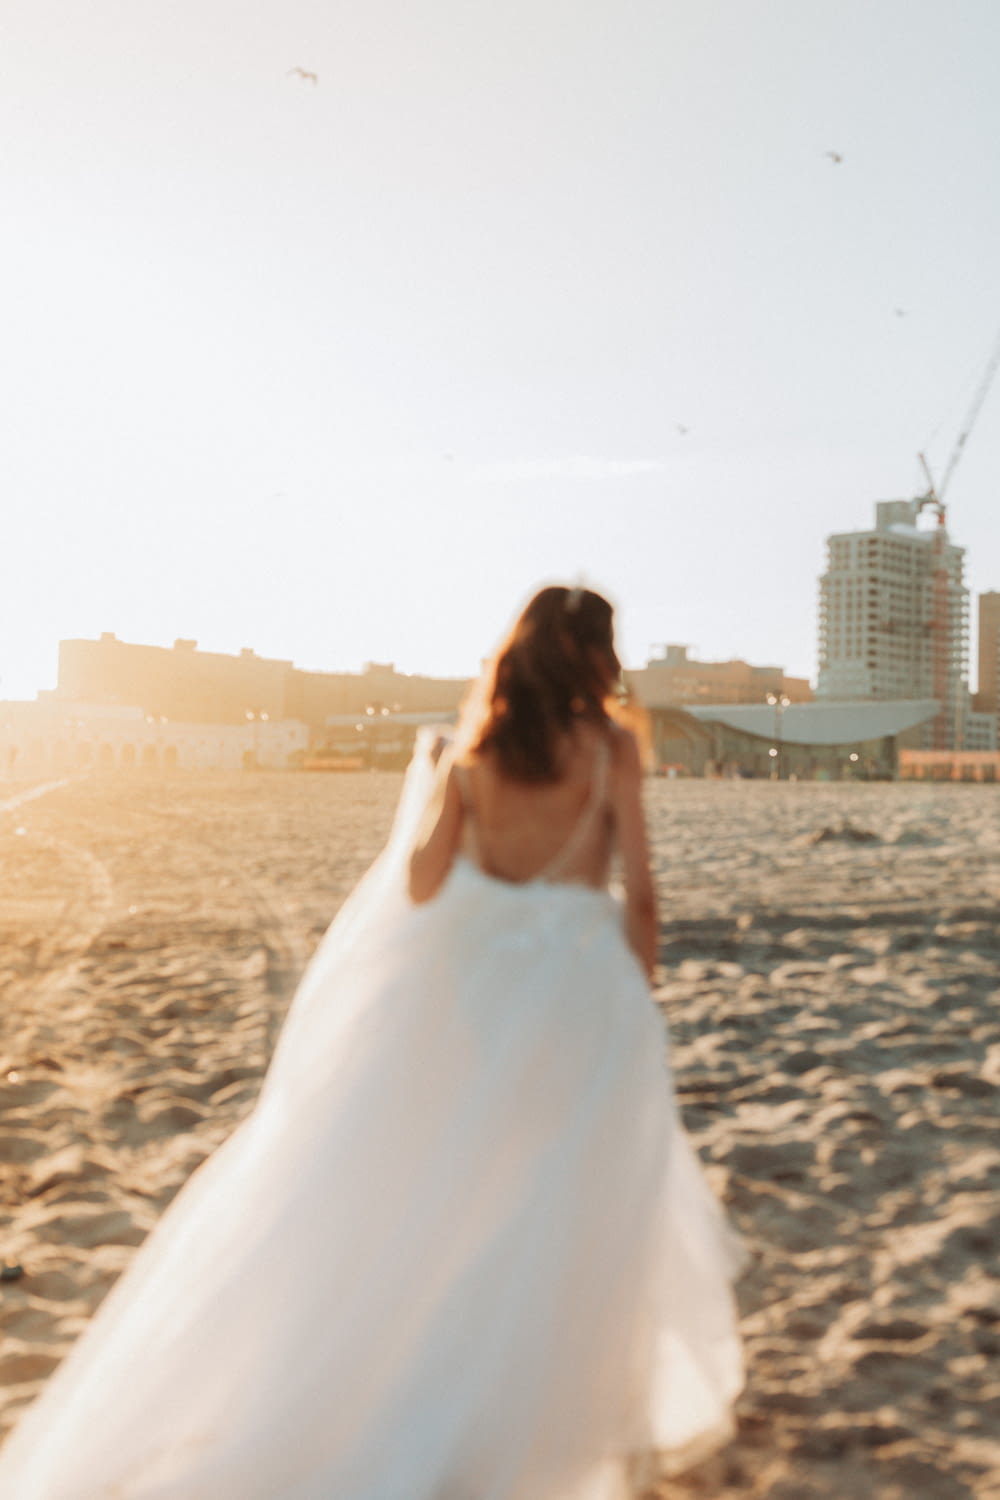 woman in white wedding dress standing on beach during daytime